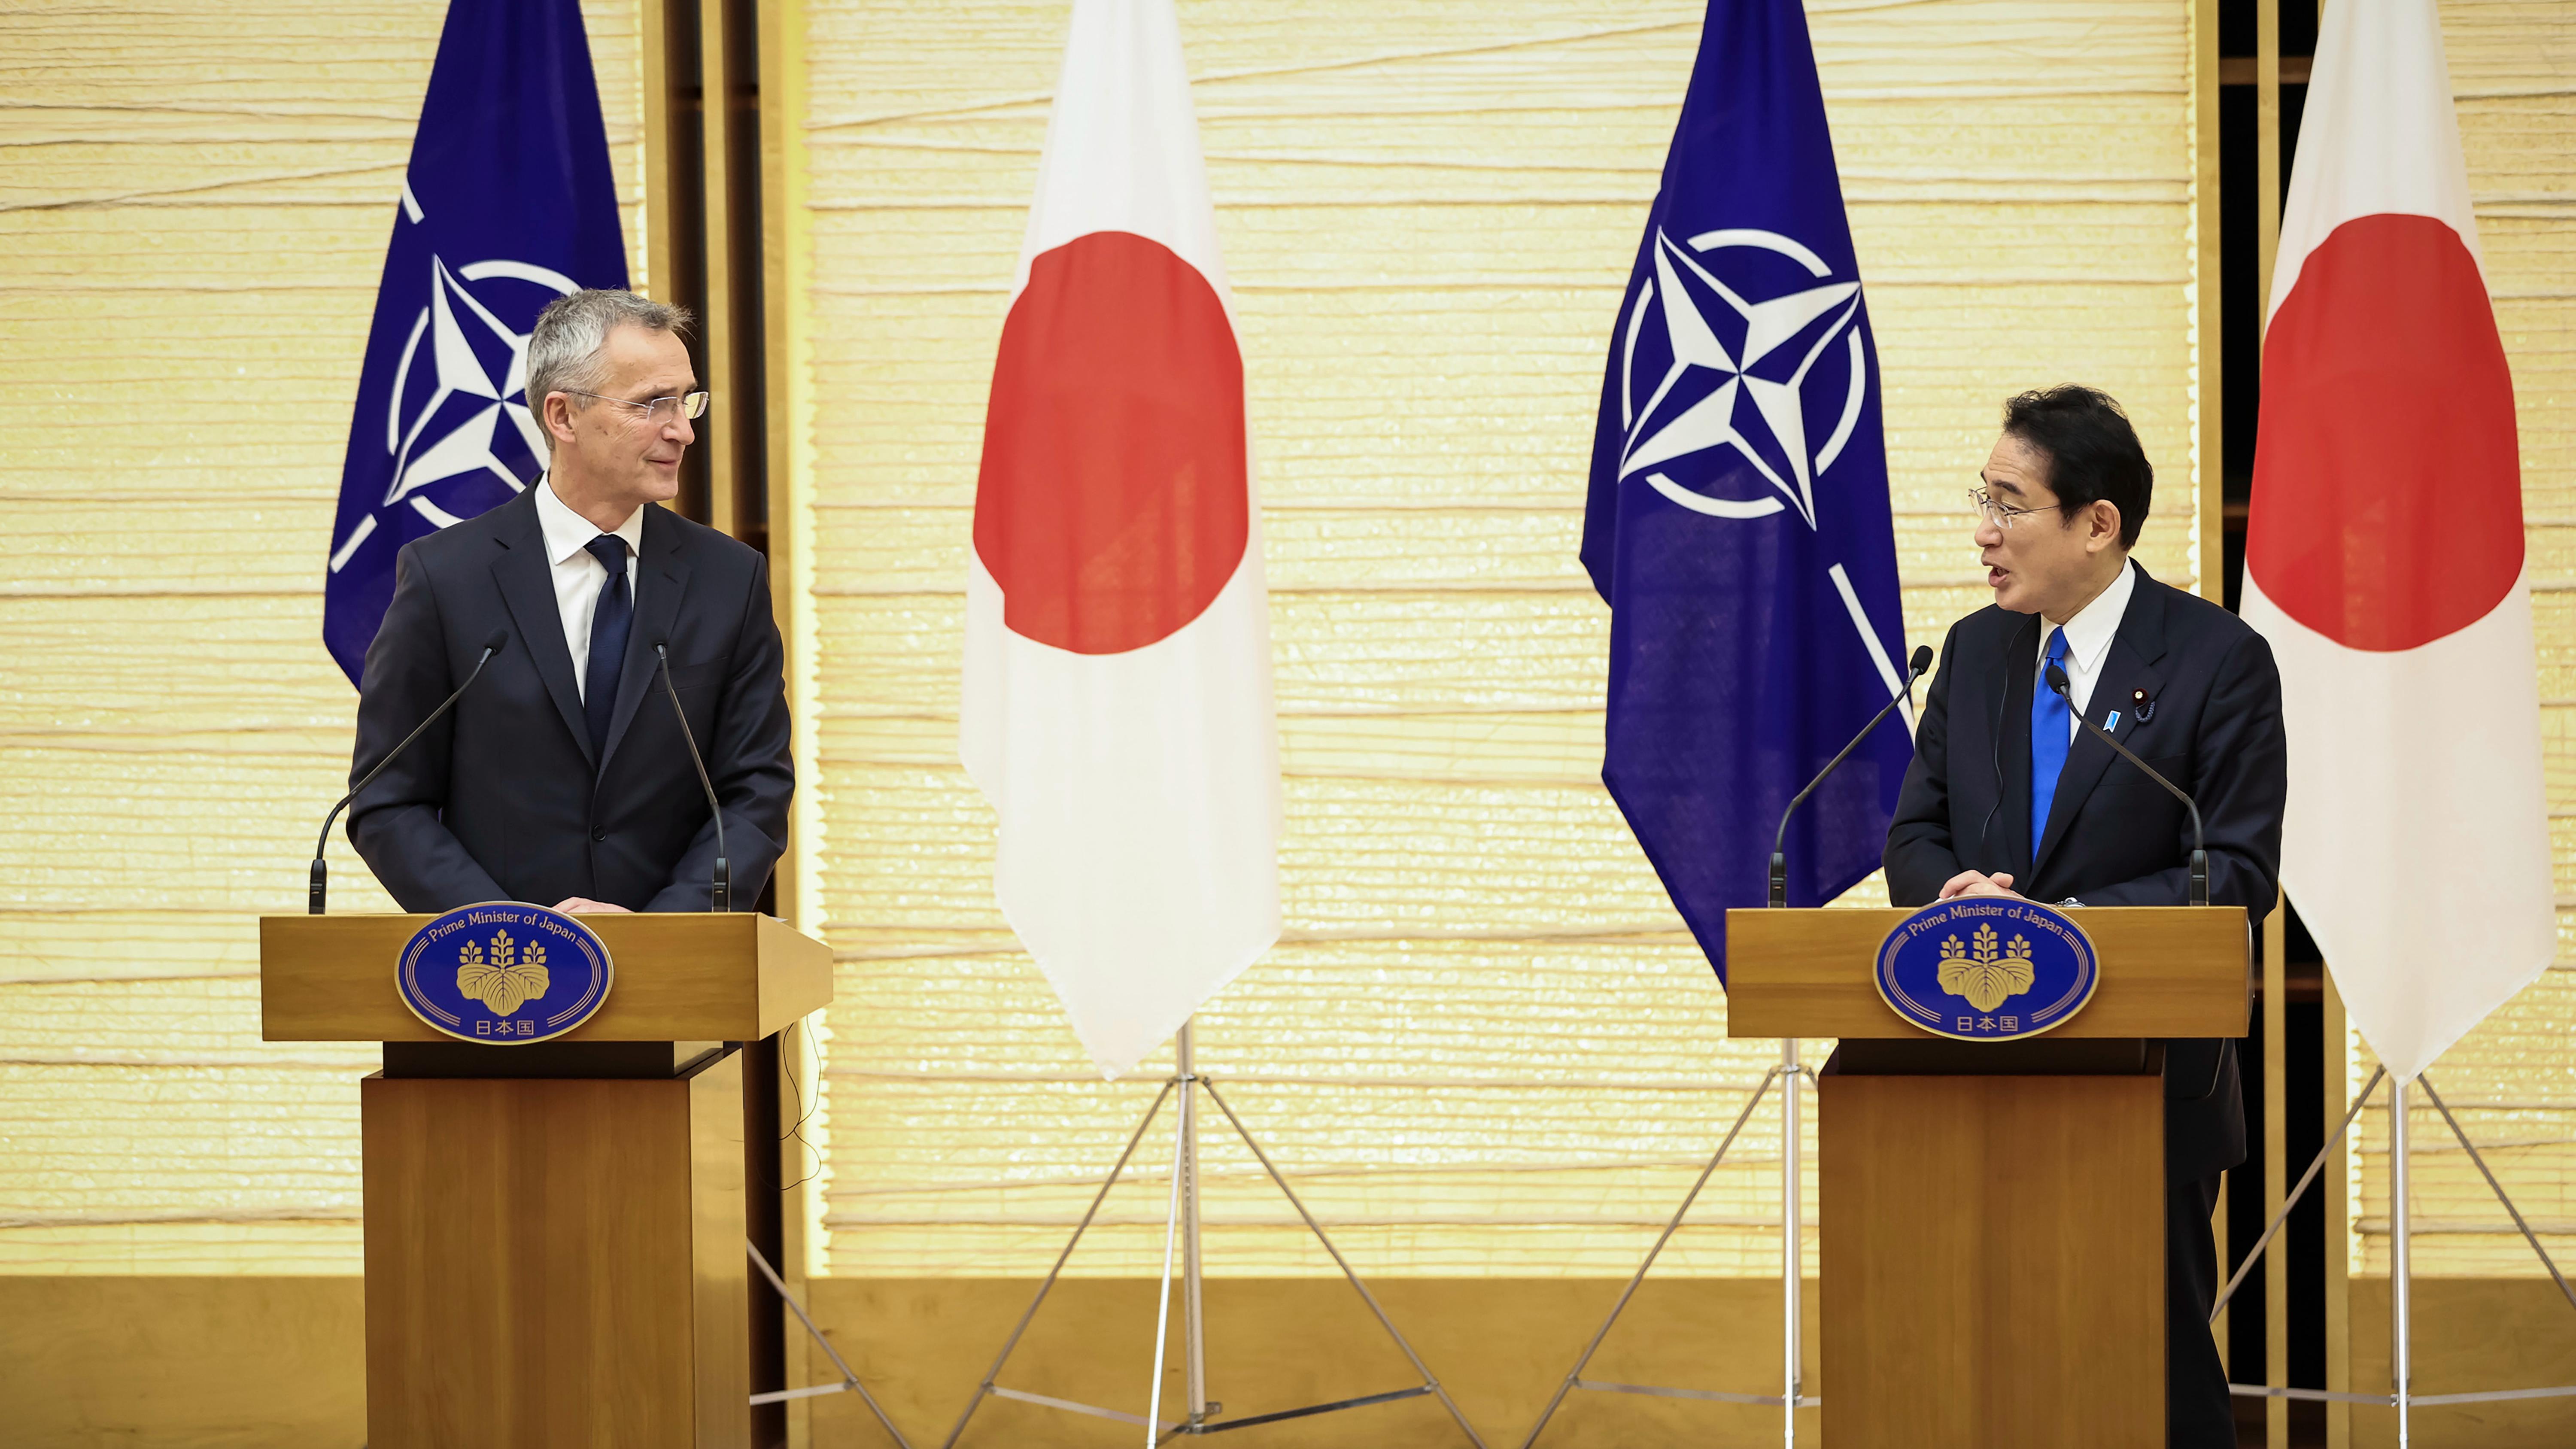 NATO Secretary-General Jens Stoltenberg (L) and Japan's Prime Minister Fumio Kishida hold a joint media briefing in Tokyo, Japan, January 31, 2023. /AP